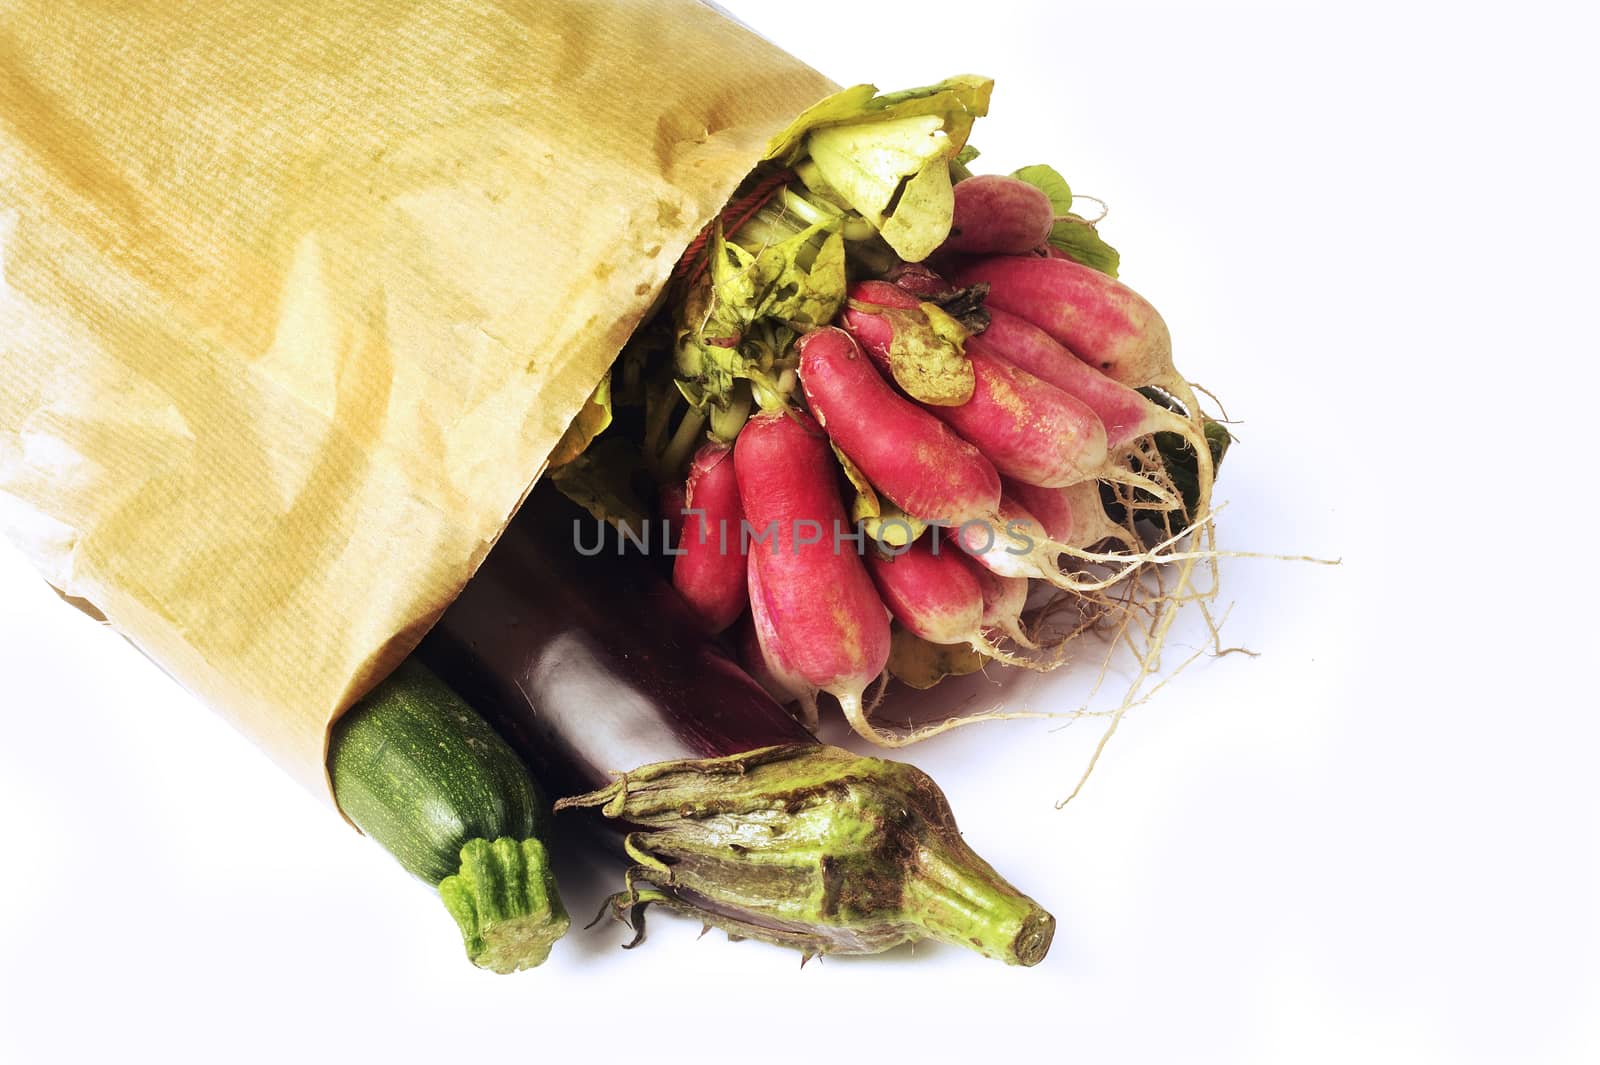 Vegetables in a bag of paper isolated on white background in studio